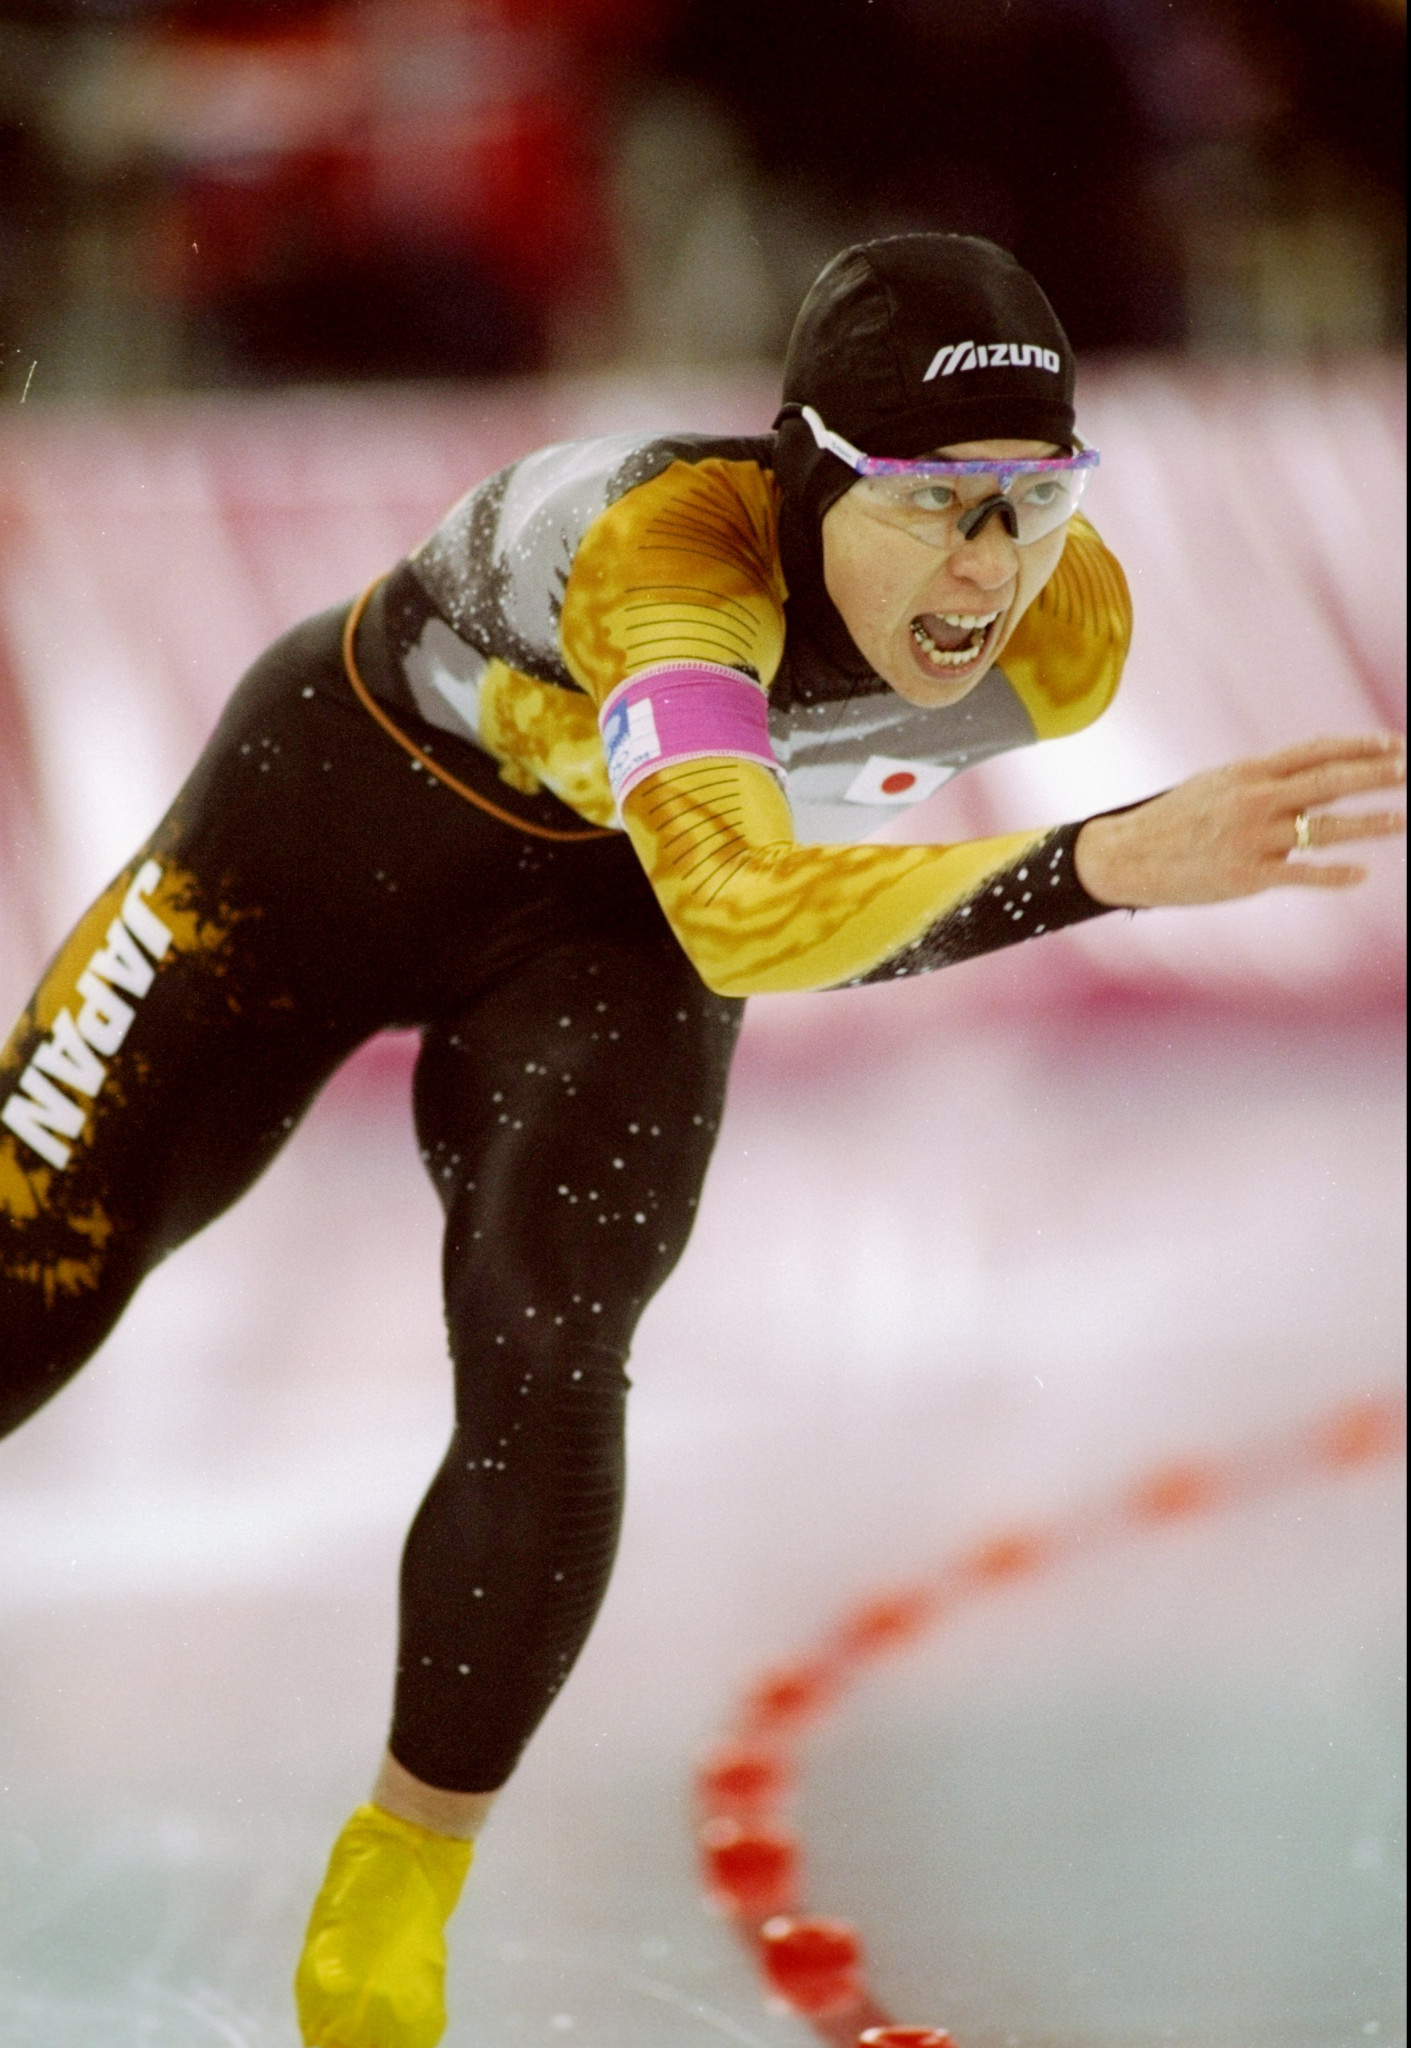 Seiko Hashimoto won Olympic bronze during her speed skating career ©Getty Images